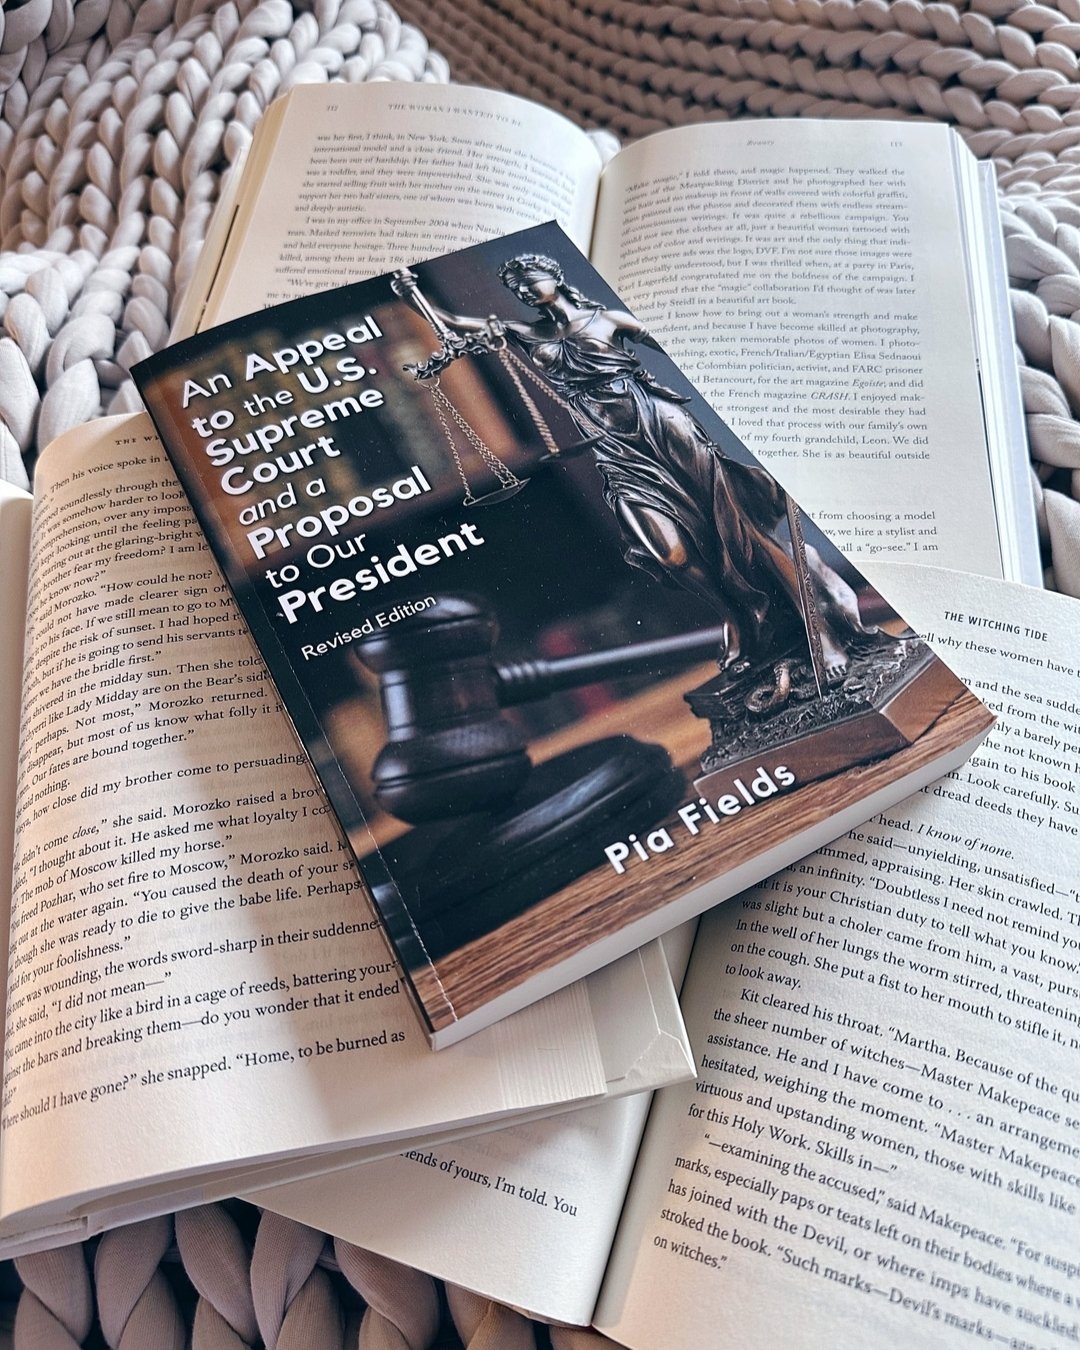 What book have you read recently from a small/Indie press? One of my latest reads is An Appeal to the U.S. Supreme Court and a Proposal to Our President by Pia Fields. @go2publish

Overall, this book is about the broken relationships in the Fields fa